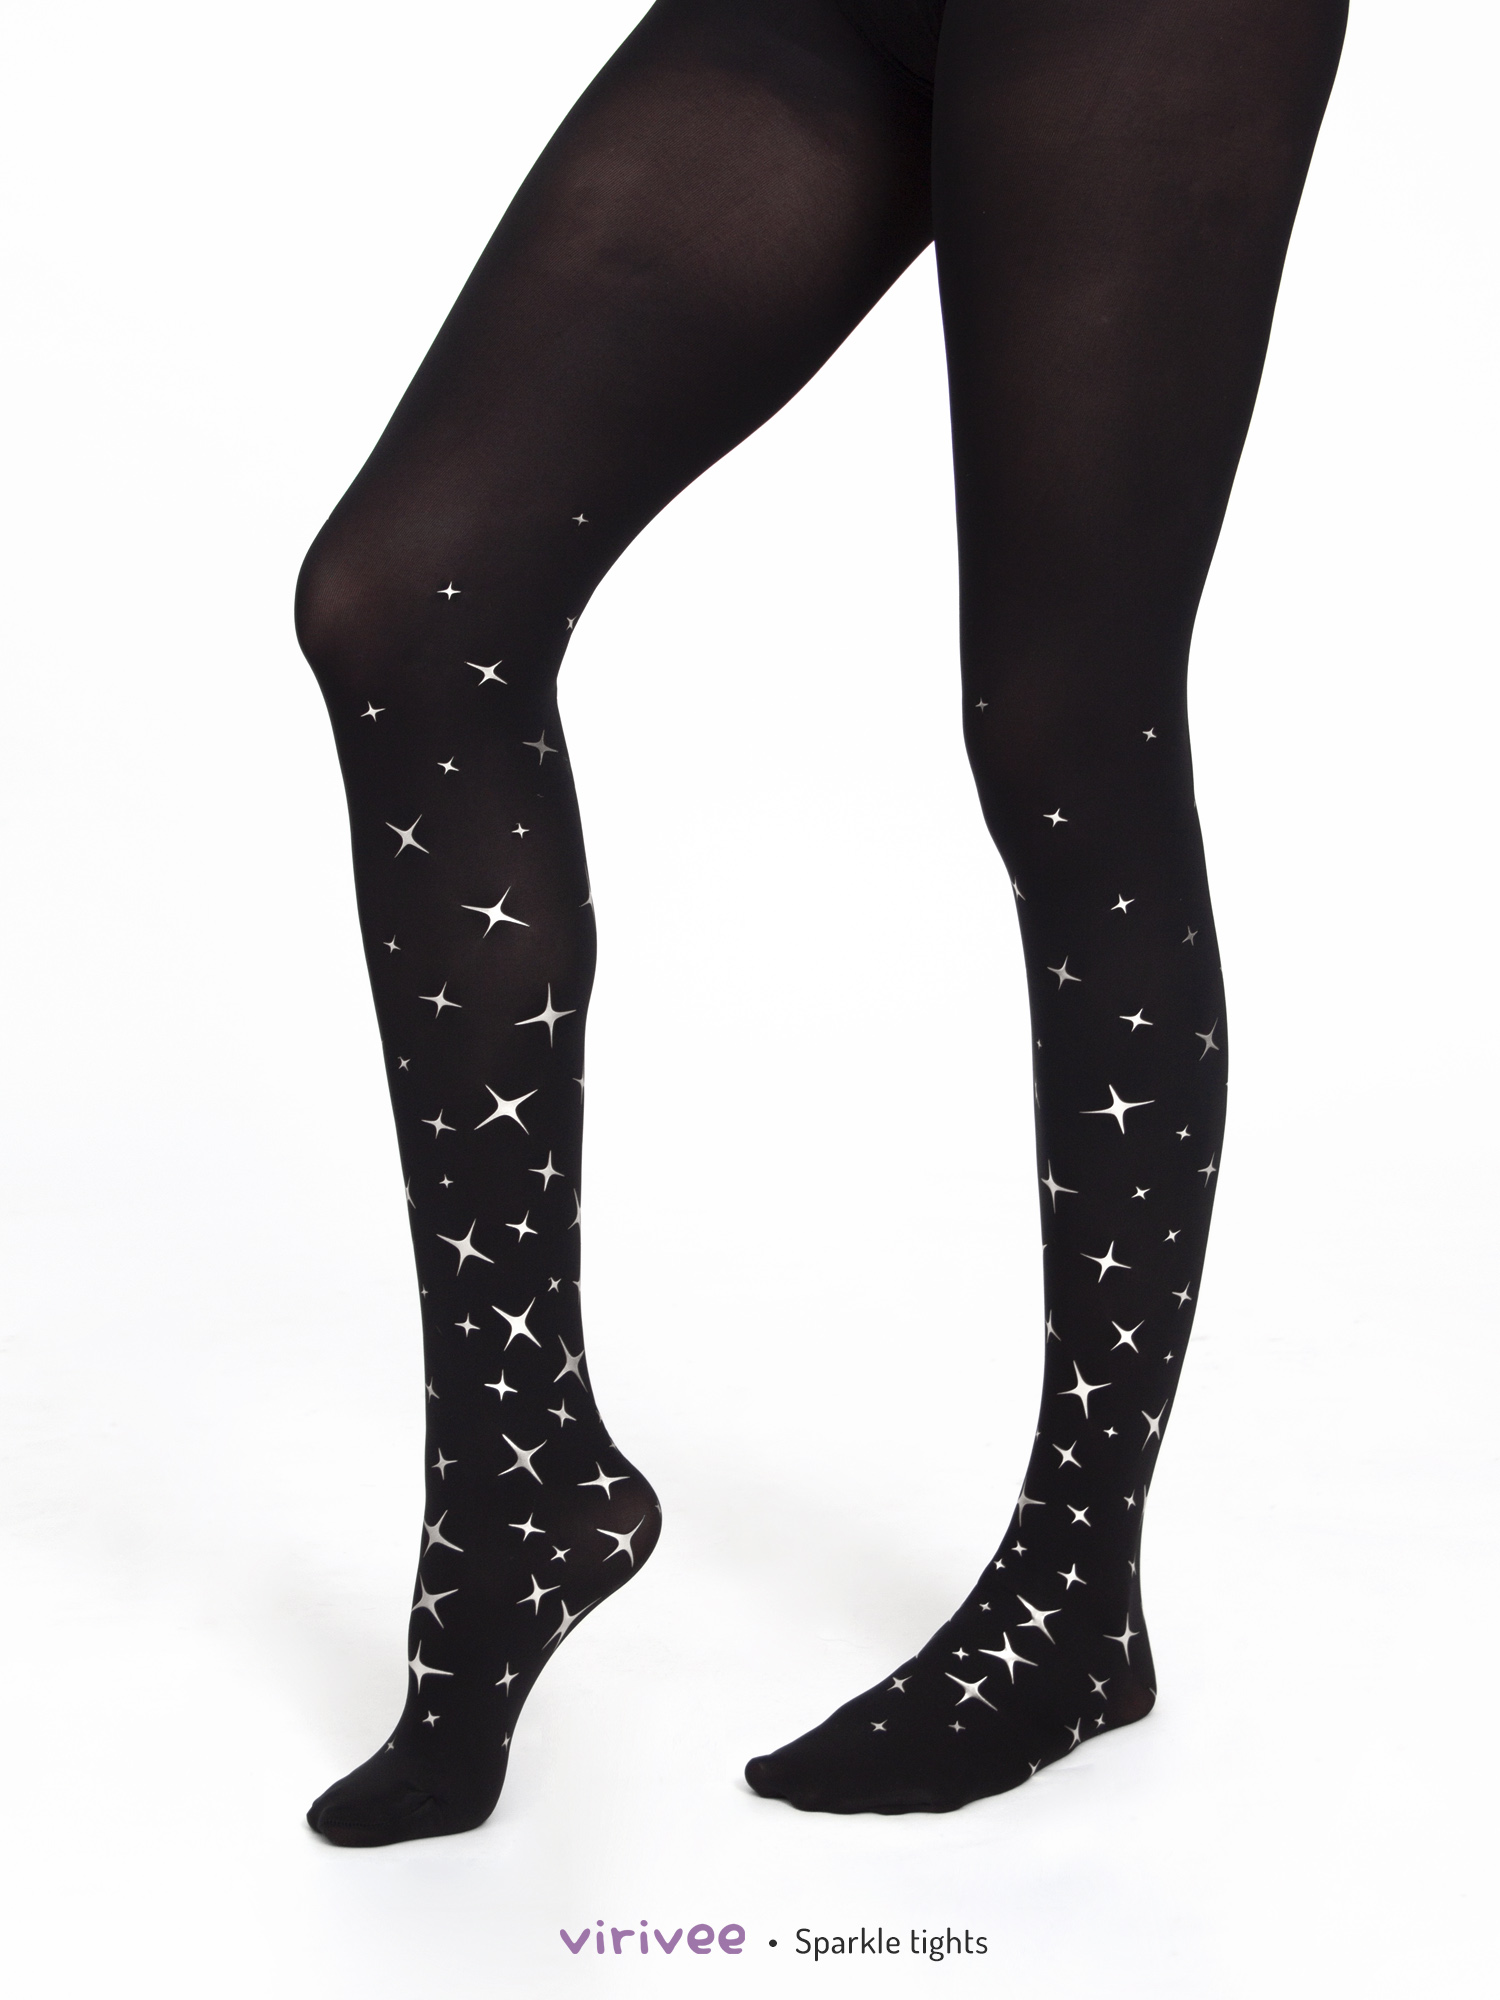 Sparkle tights with gold or silver print - Virivee Tights - Unique tights  designed and made in Europe